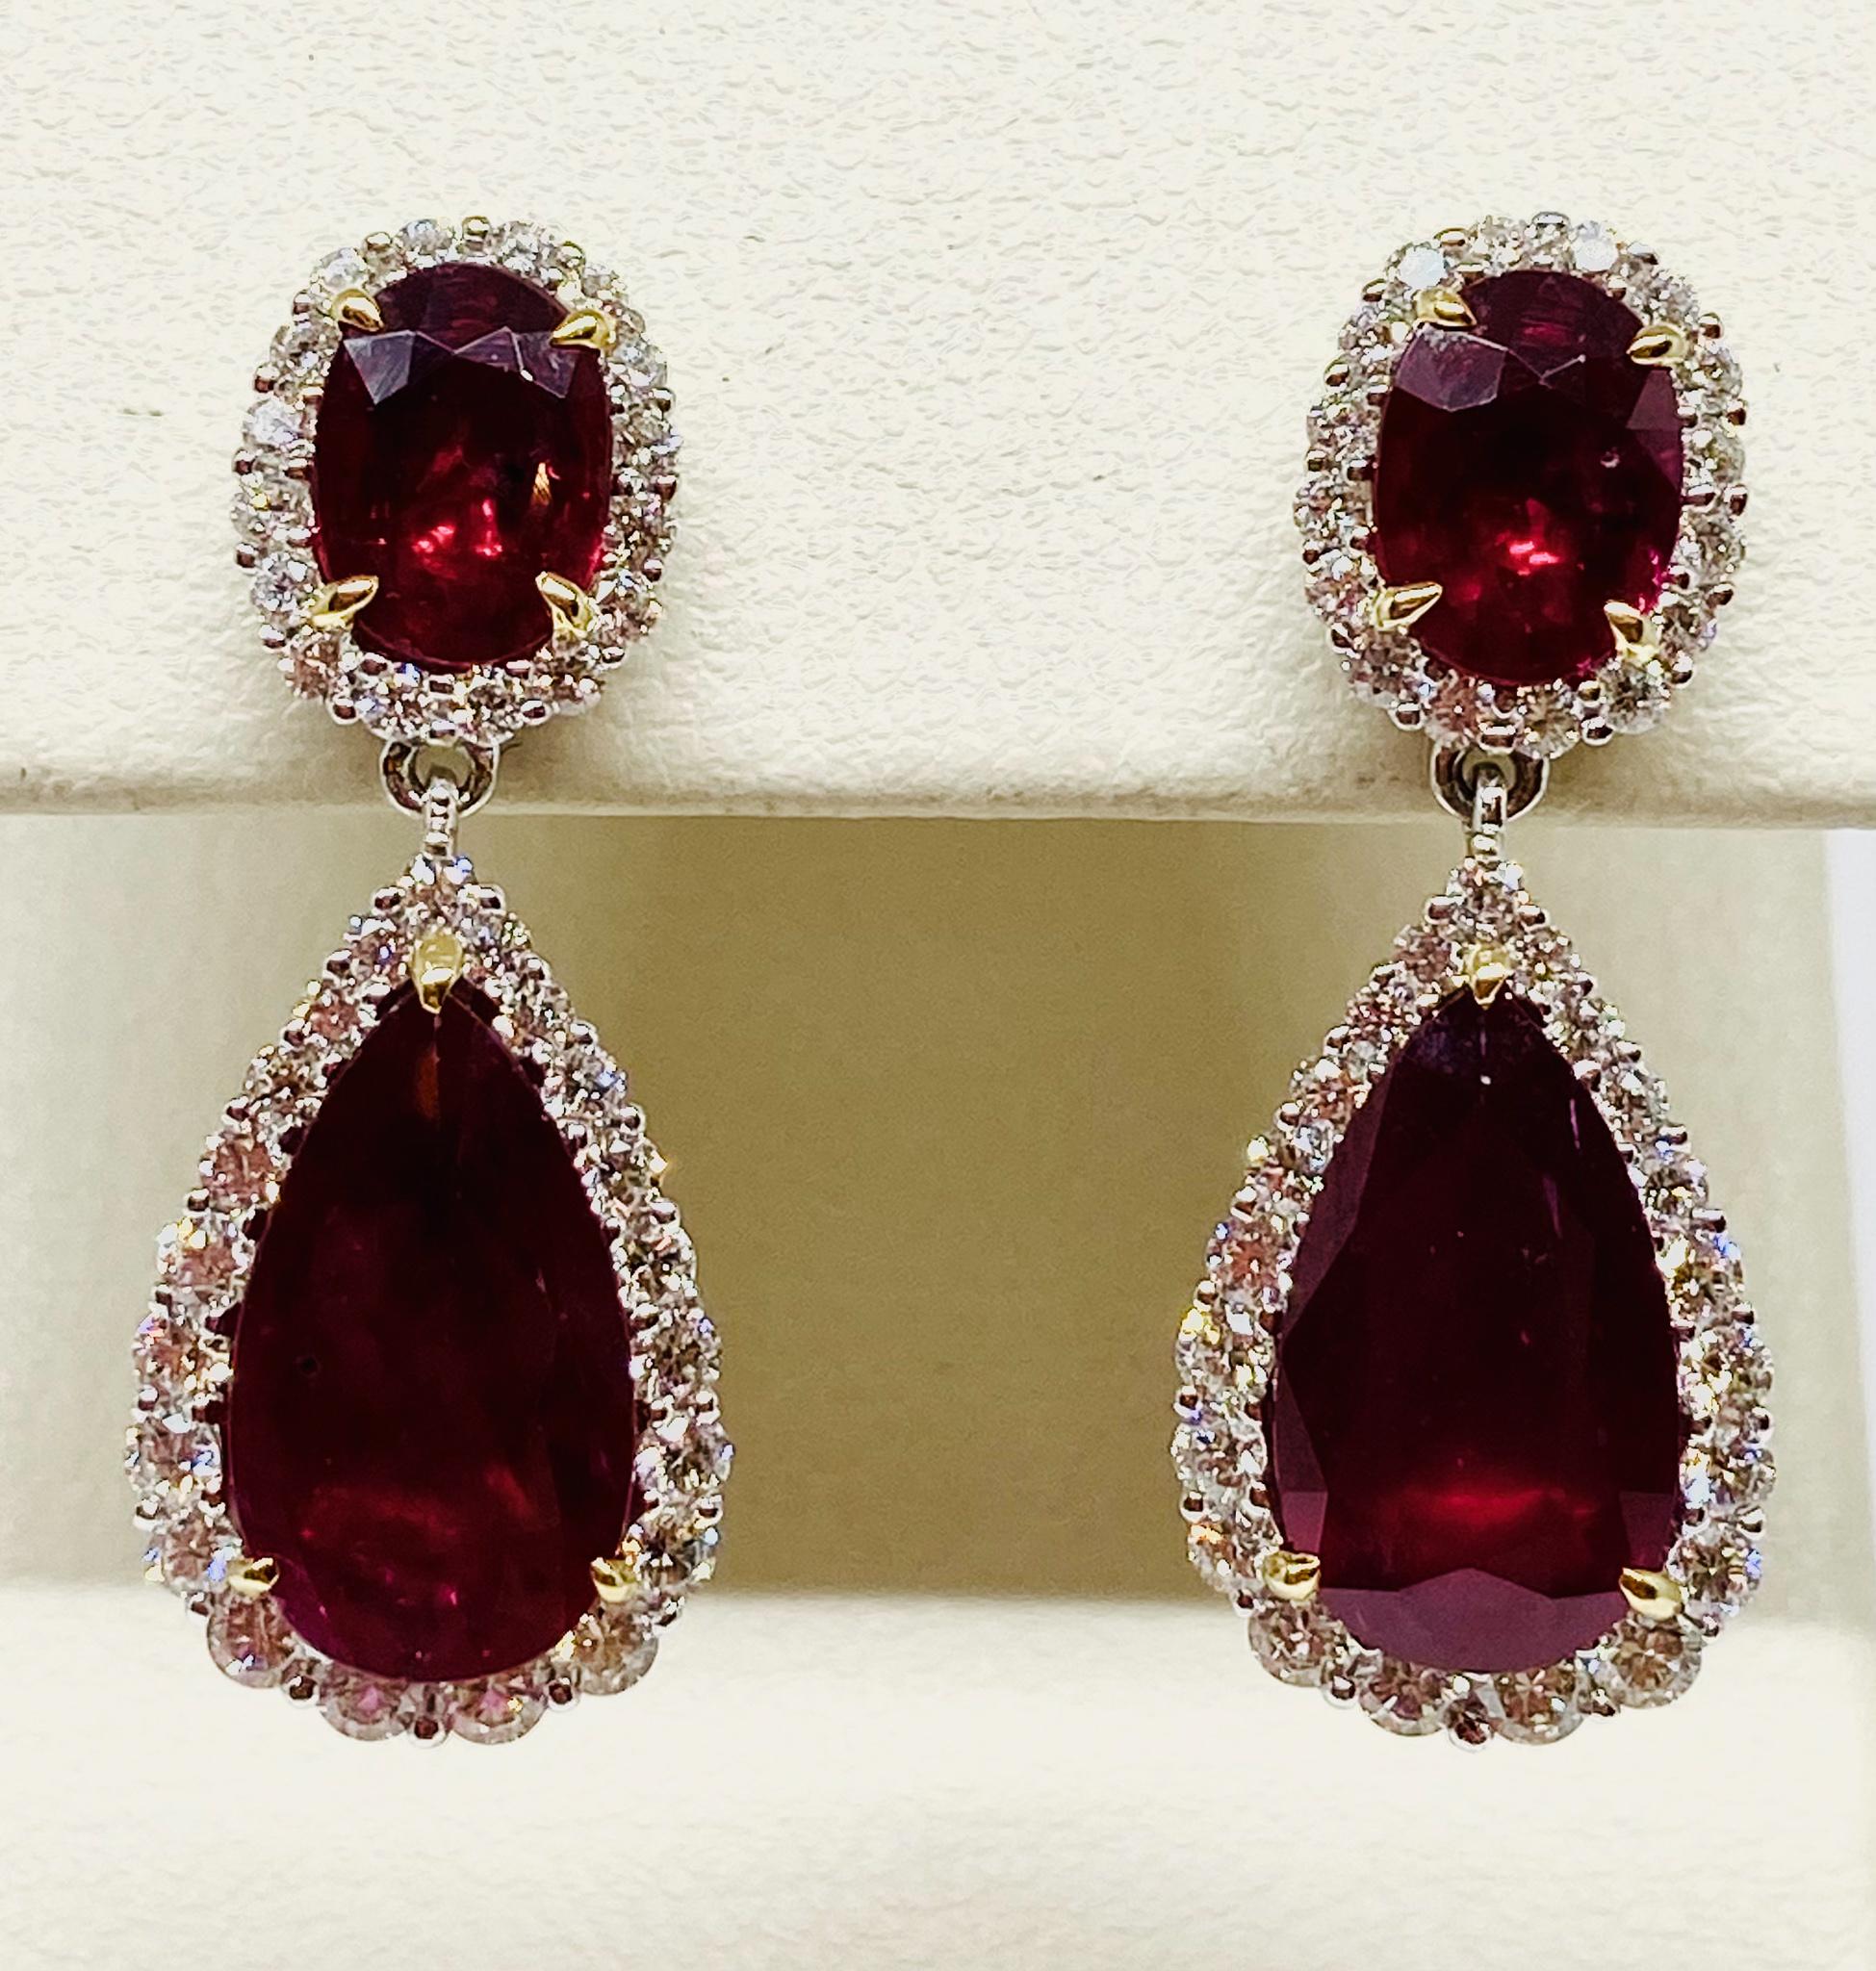 Pear Cut 5.85 Carat Ruby and Diamond Drop Earrings in 18KT White Gold For Sale